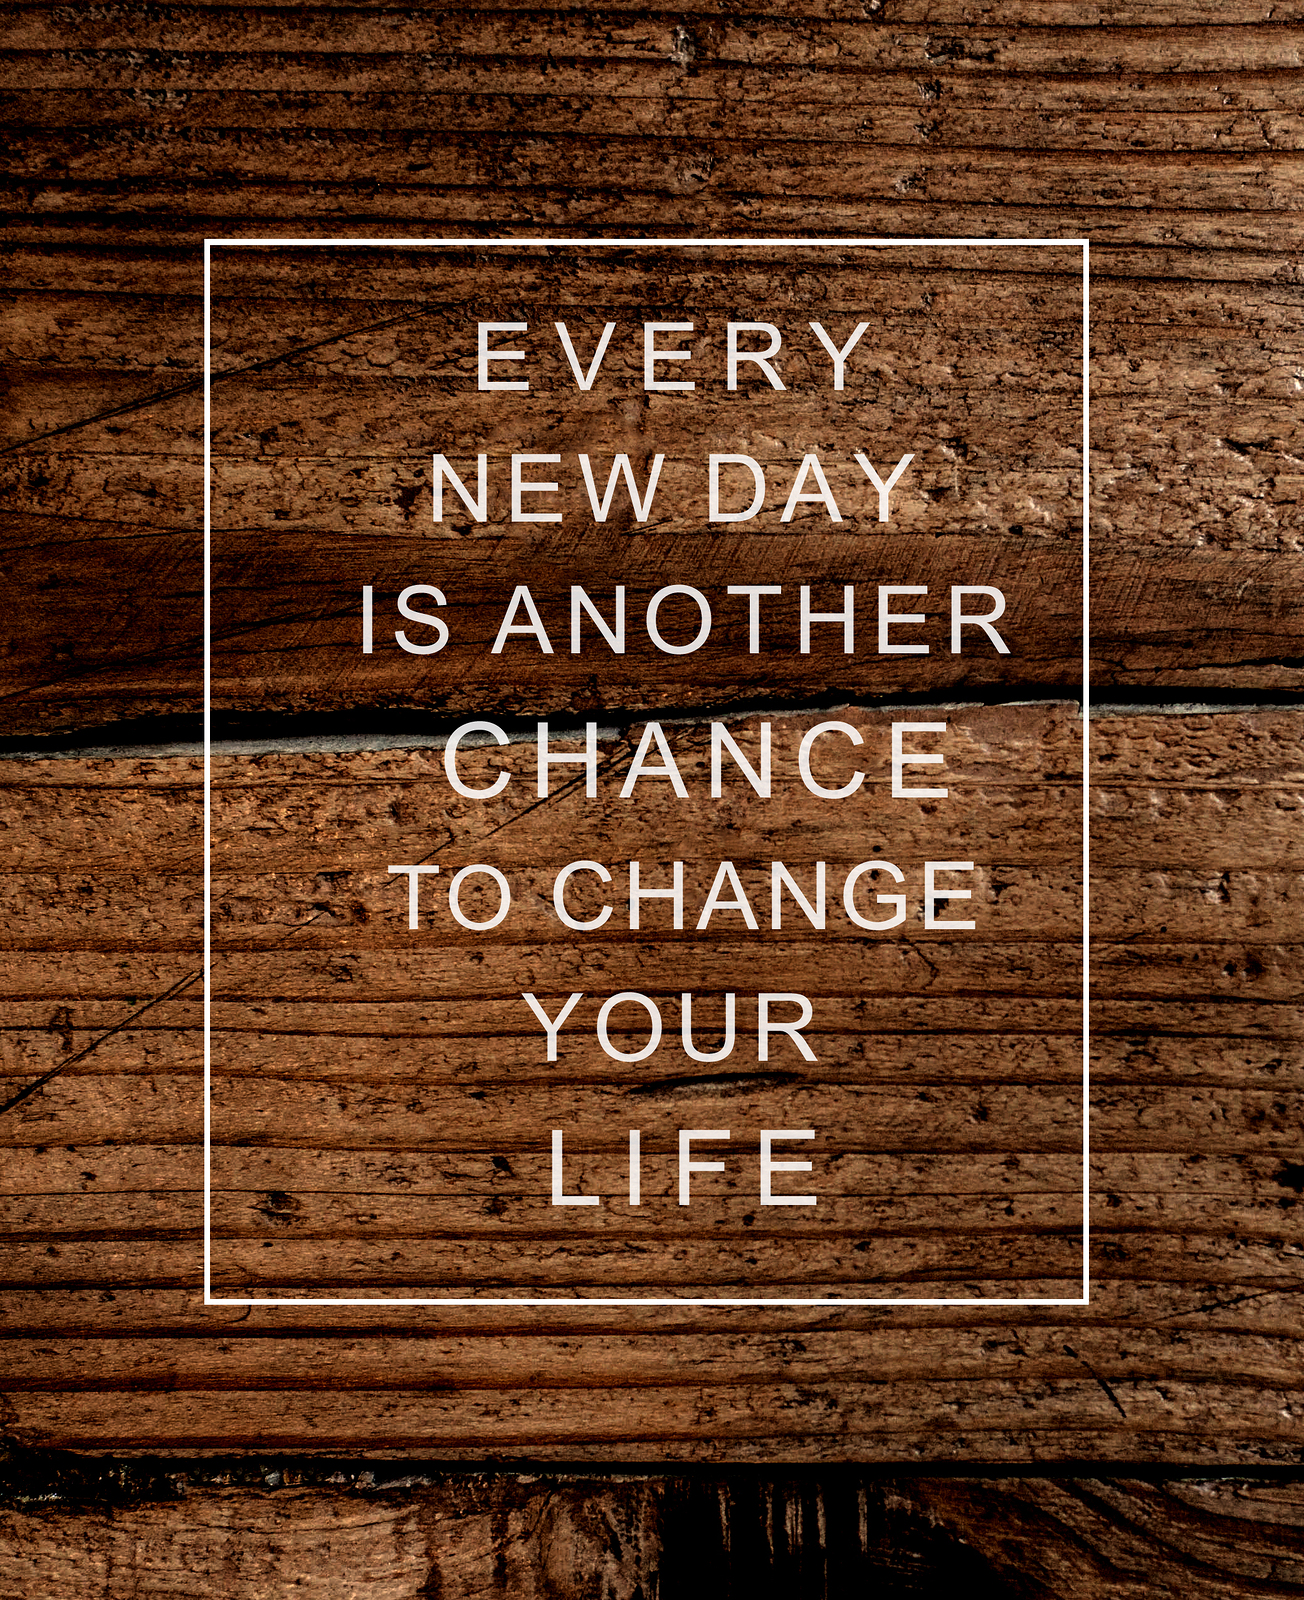 Motivational poster quote on rustic wooden background EVERY NEW DAY IS ANOTHER CHANCE TO CHANGE YOUR LIFE. Concept image